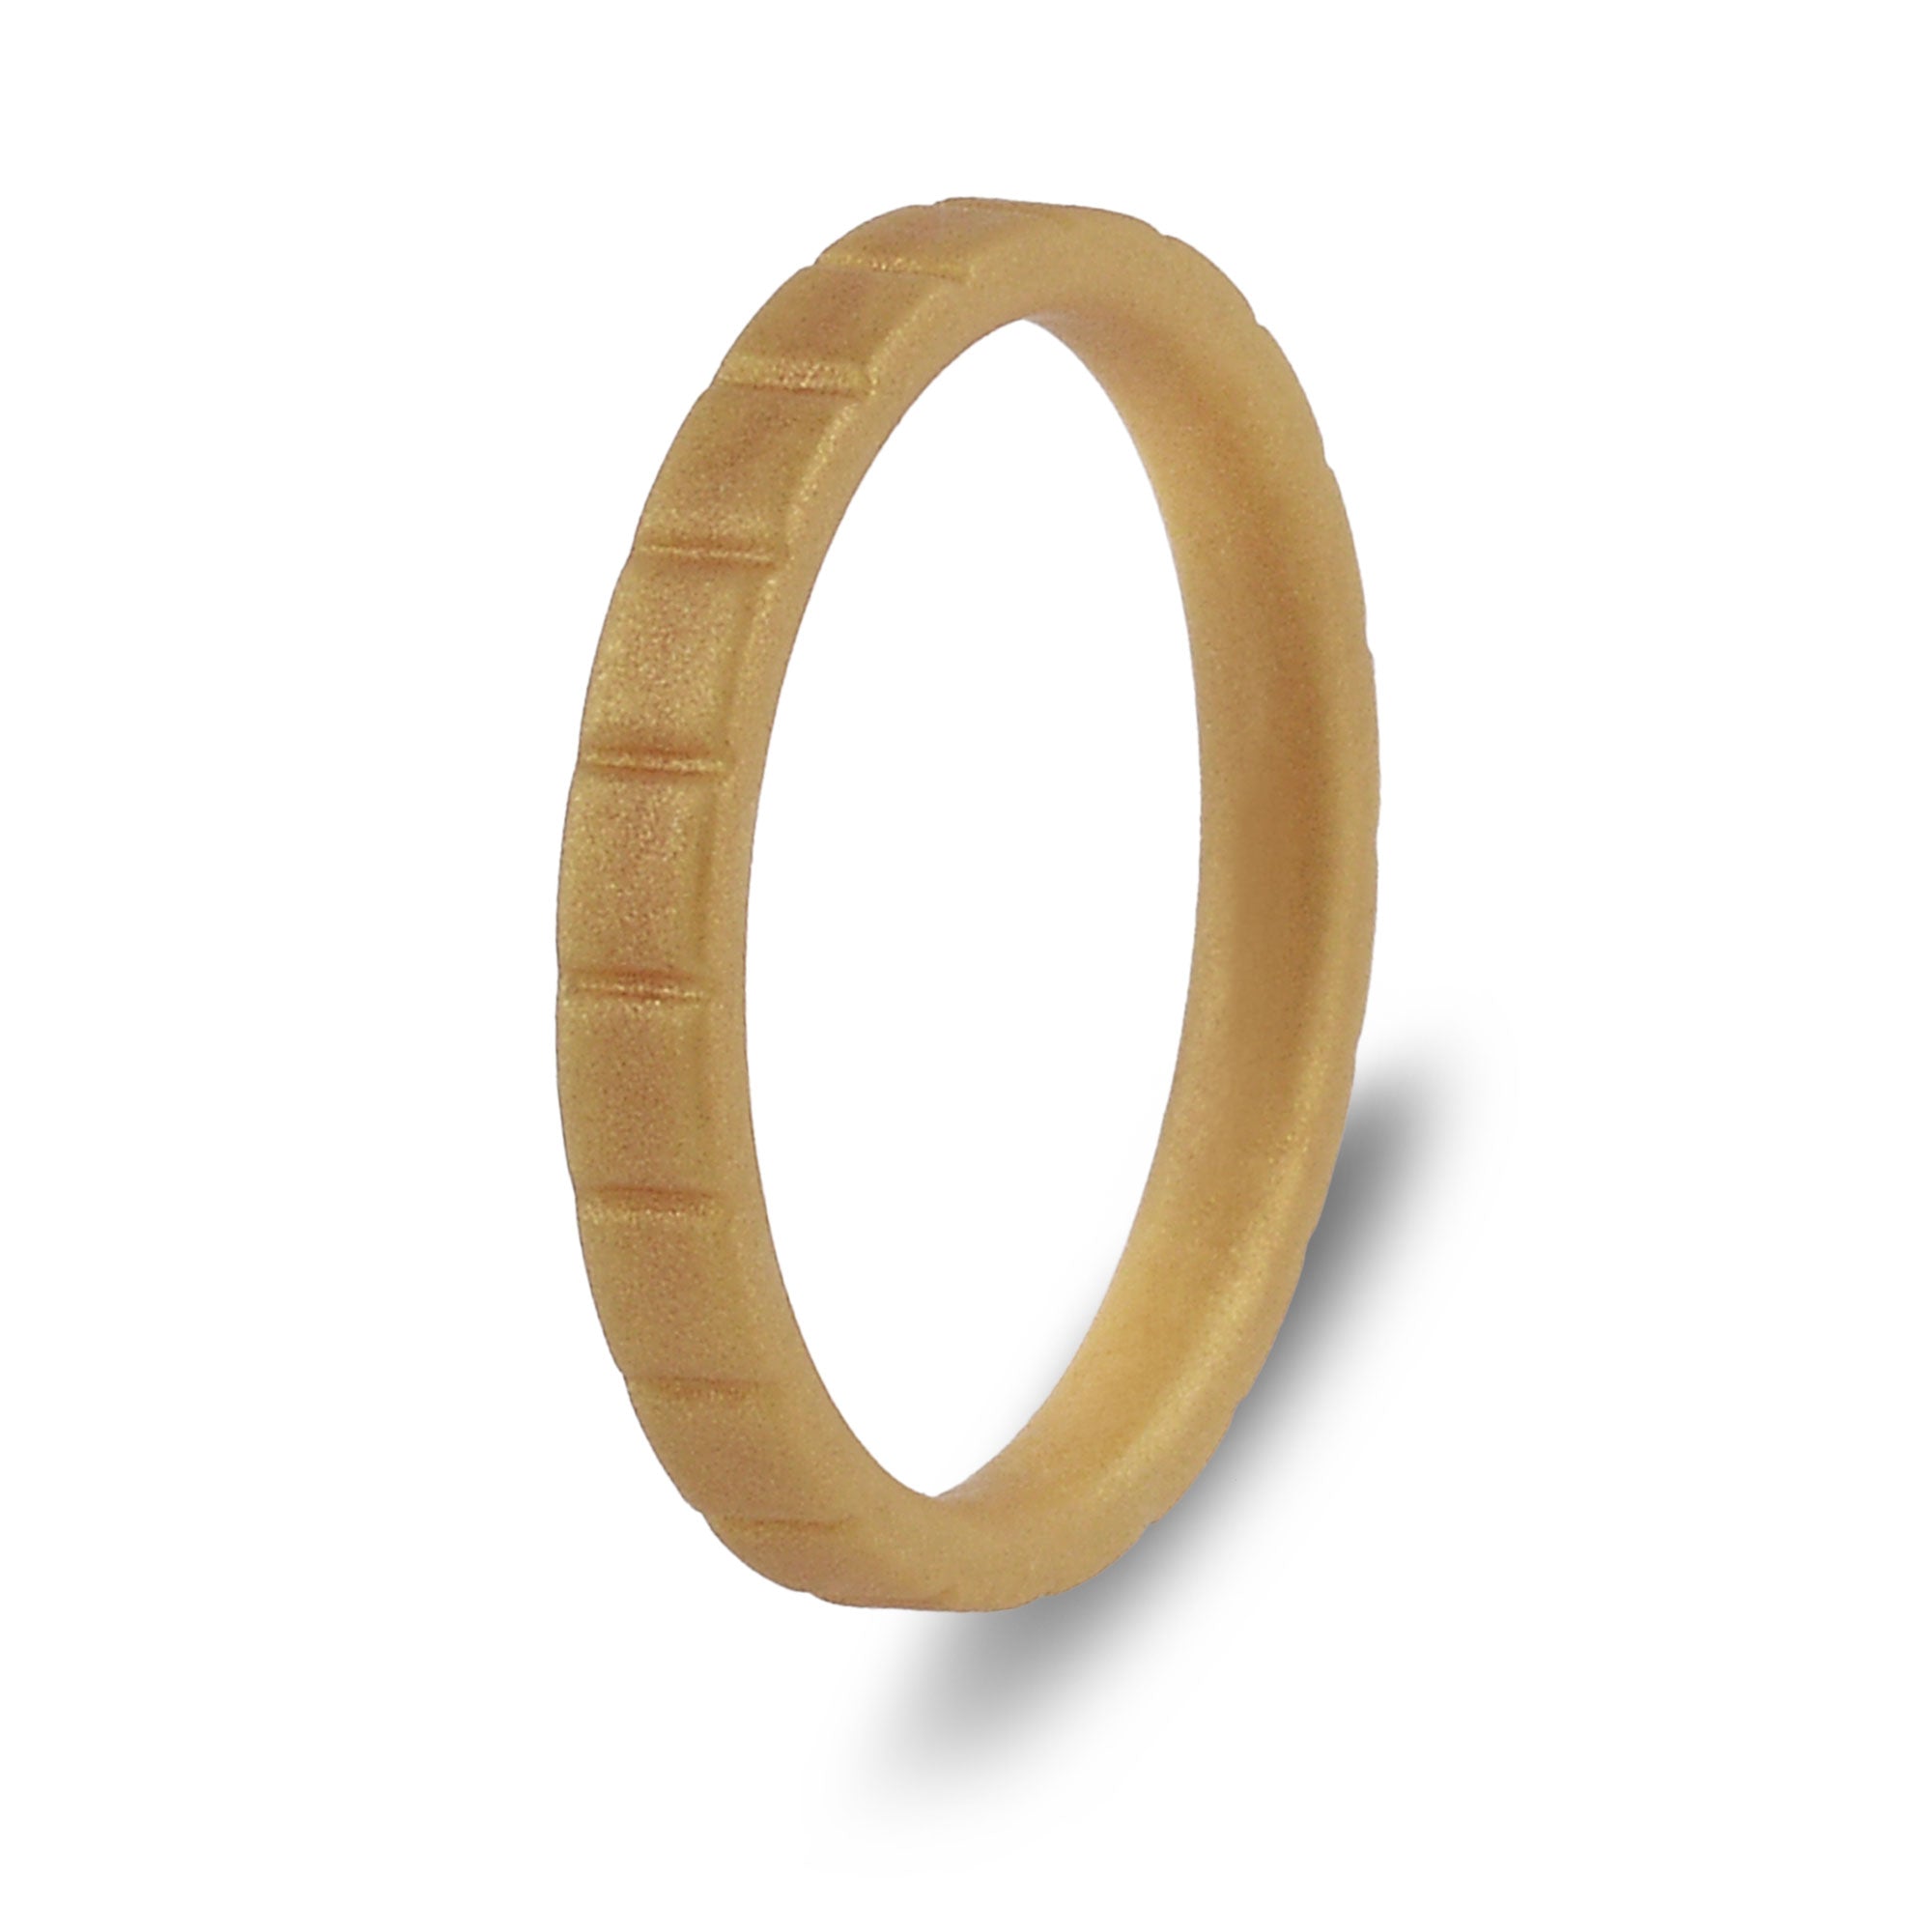 The Sunbeam - Silicone Ring